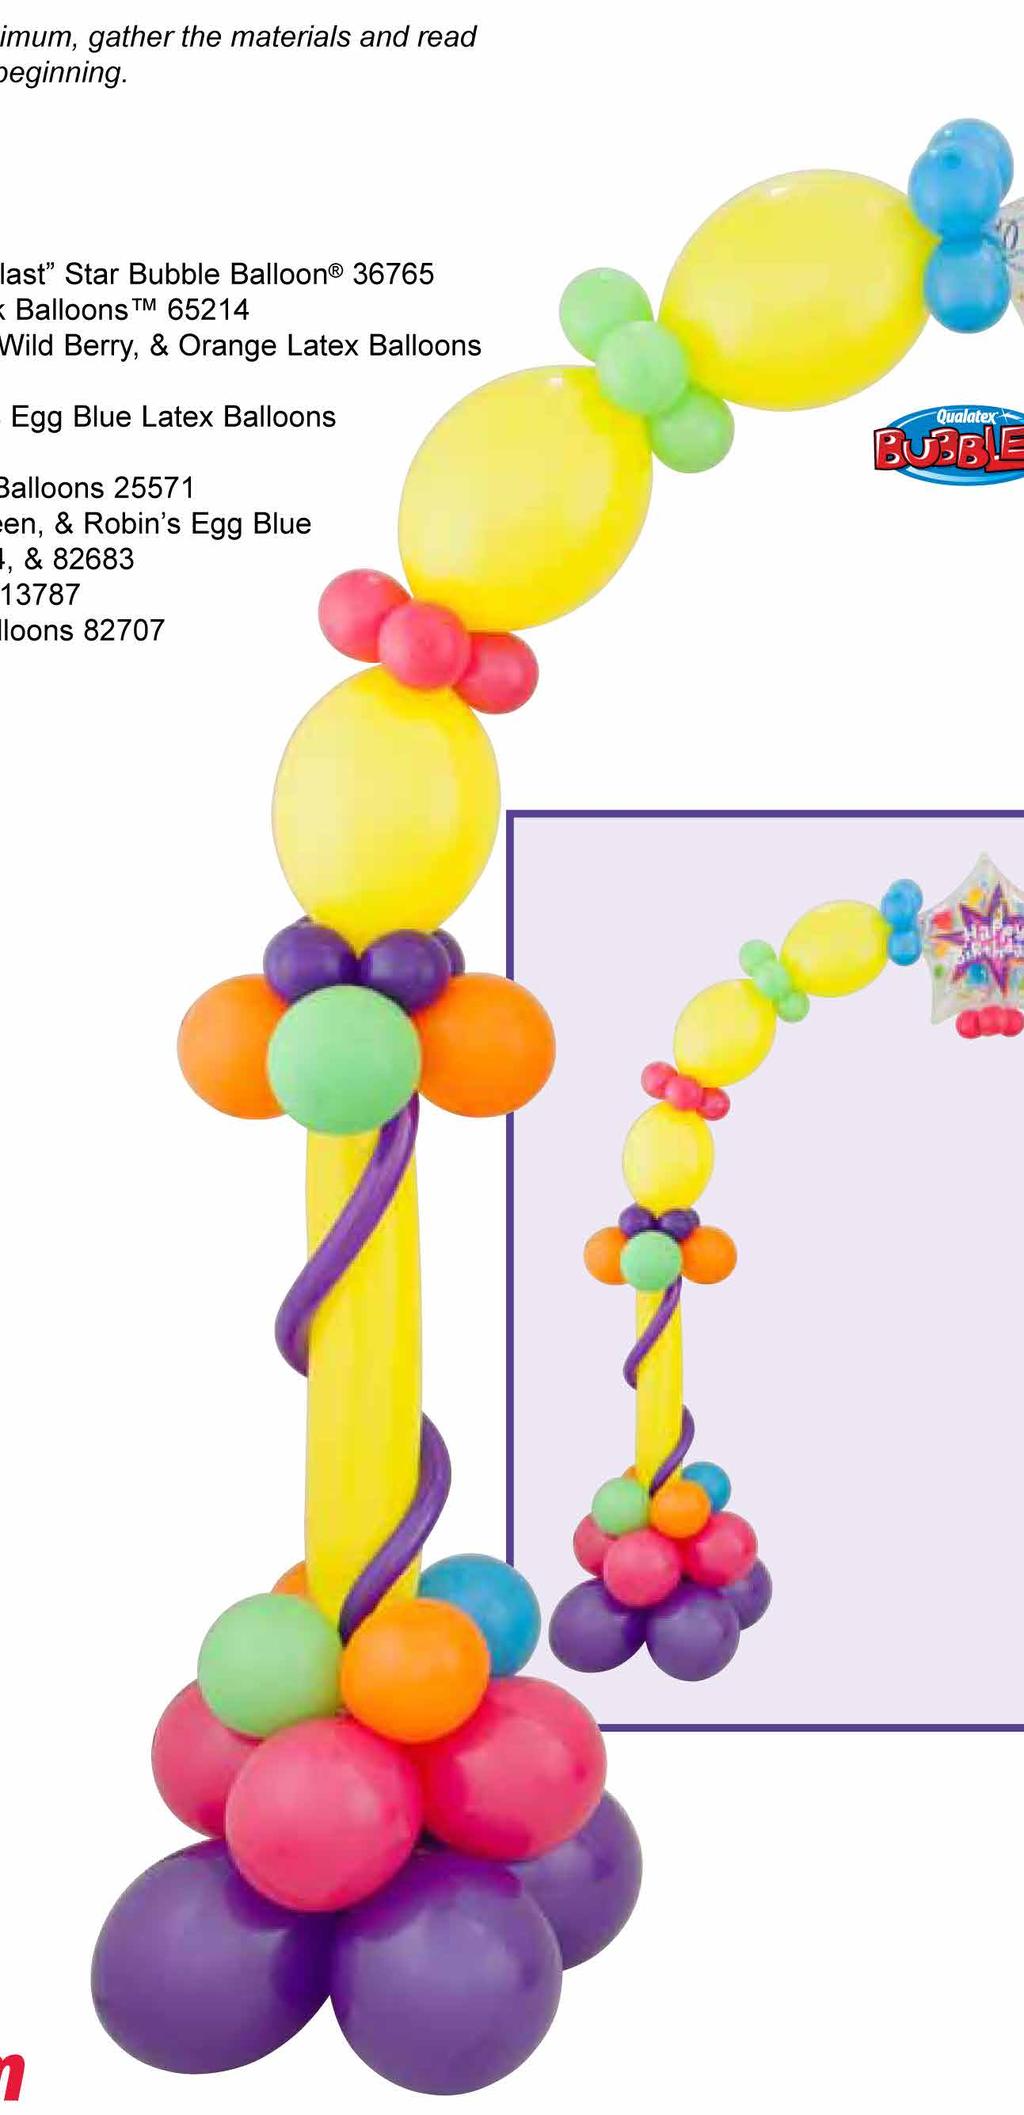 Chain Arch 1. Air inflate four 11" purple violet latex to 10" and make a four-balloon cluster. Using an uninflated 260, tie a heavy weight to the cluster. 2. Make a four-balloon cluster with 11" wild berry latex inflated to 8".